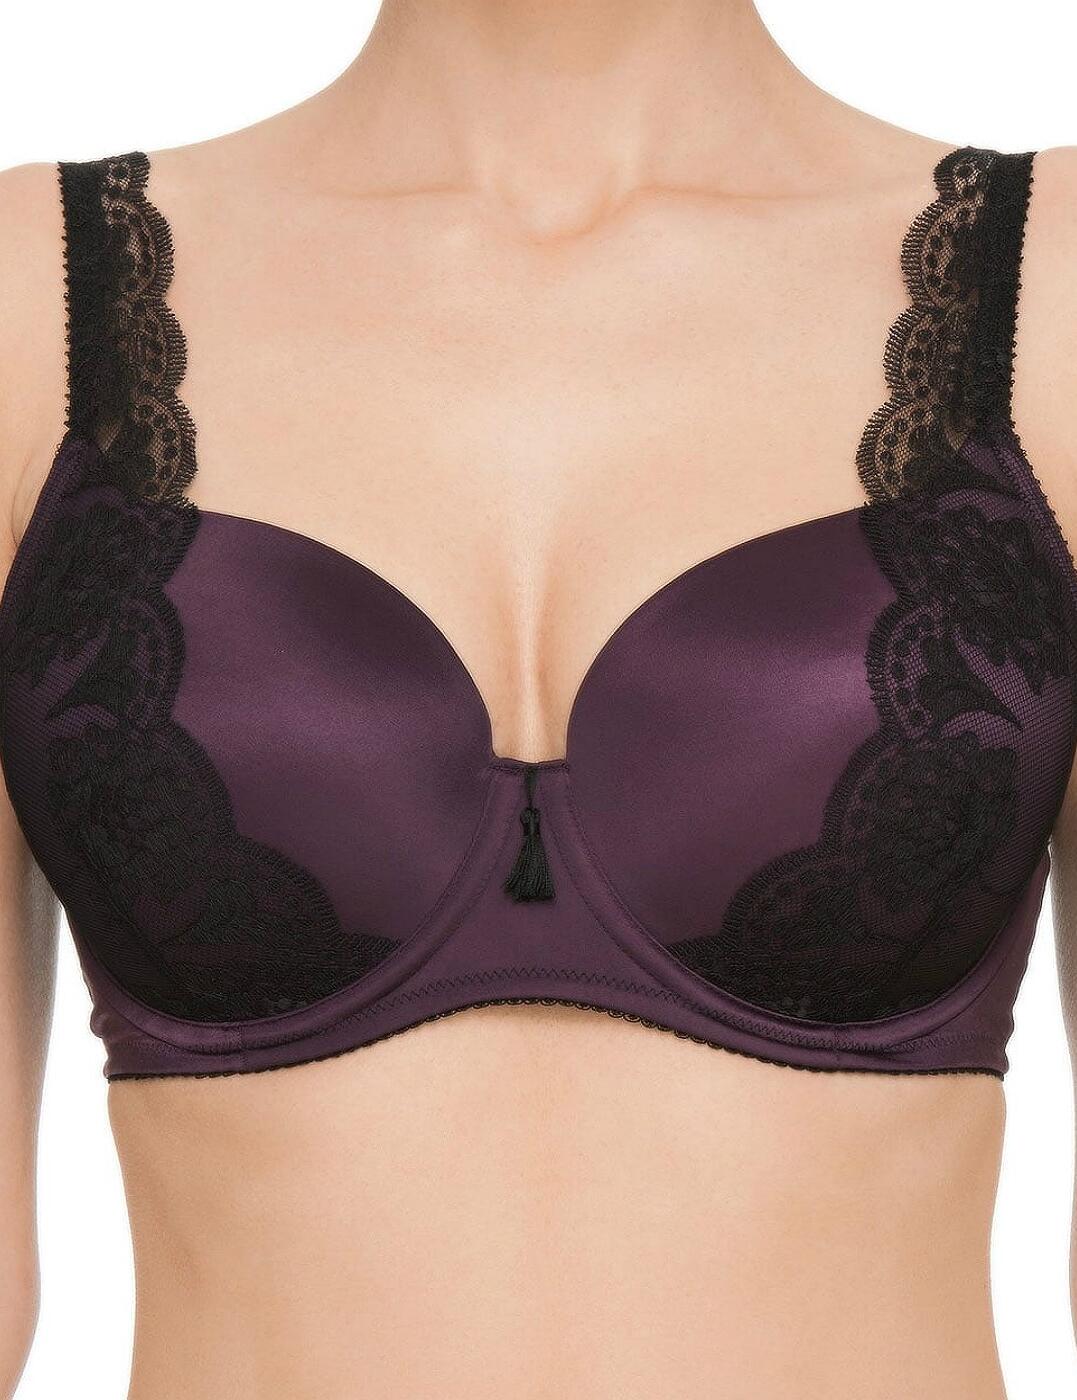 354512 Ultimo Cassiopeia Underwired Moulded Fuller Bust Balcony Bra - 354512 Wine